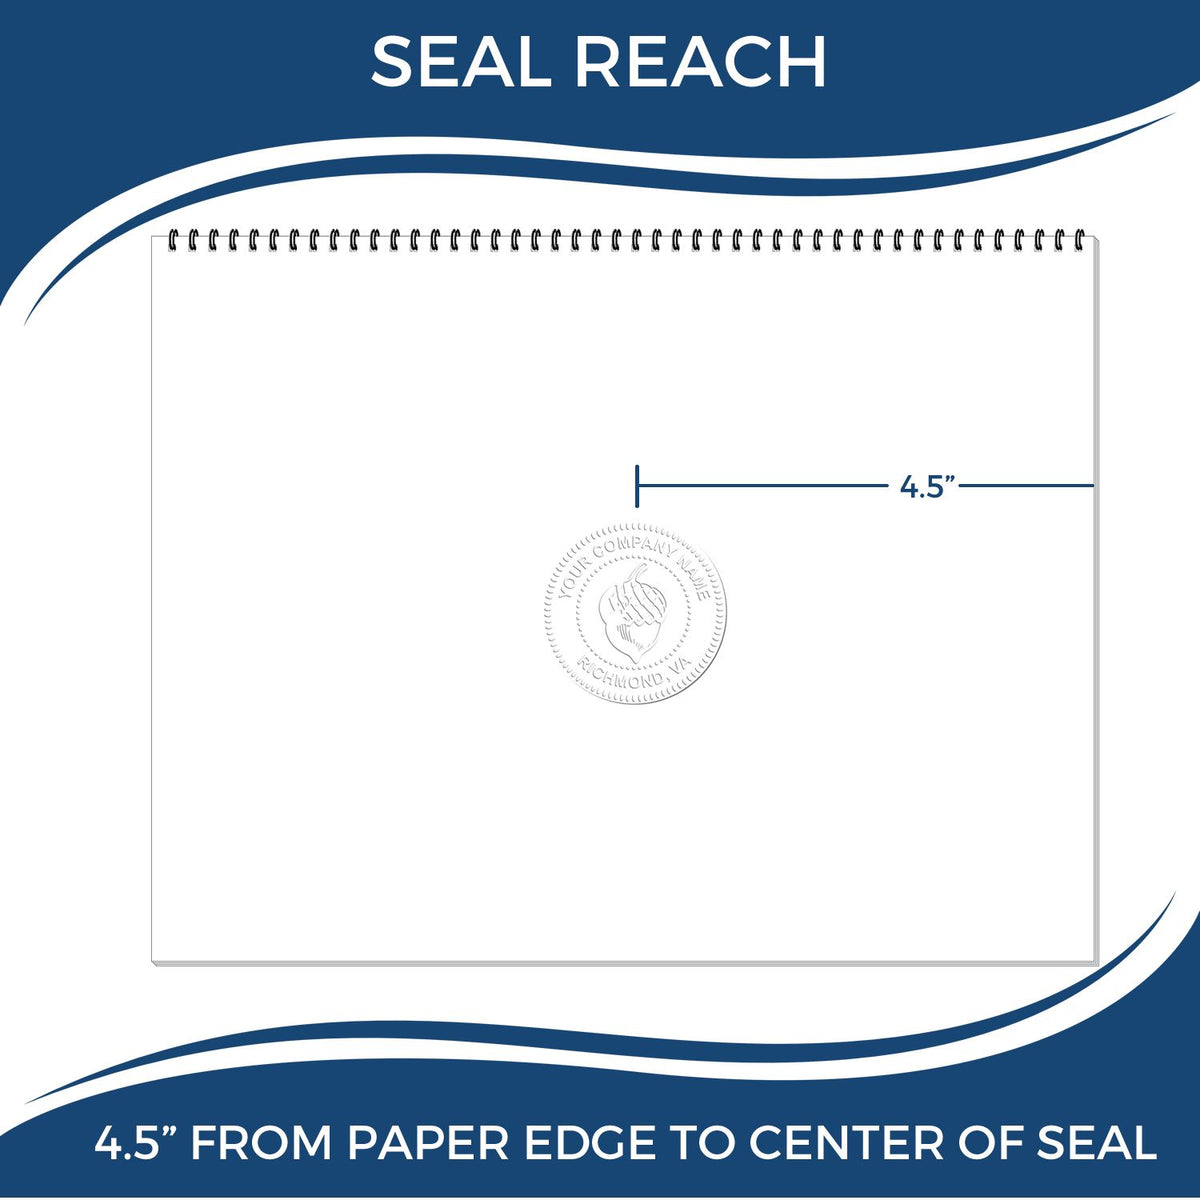 An infographic showing the seal reach which is represented by a ruler and a miniature seal image of the State of Maryland Extended Long Reach Engineer Seal